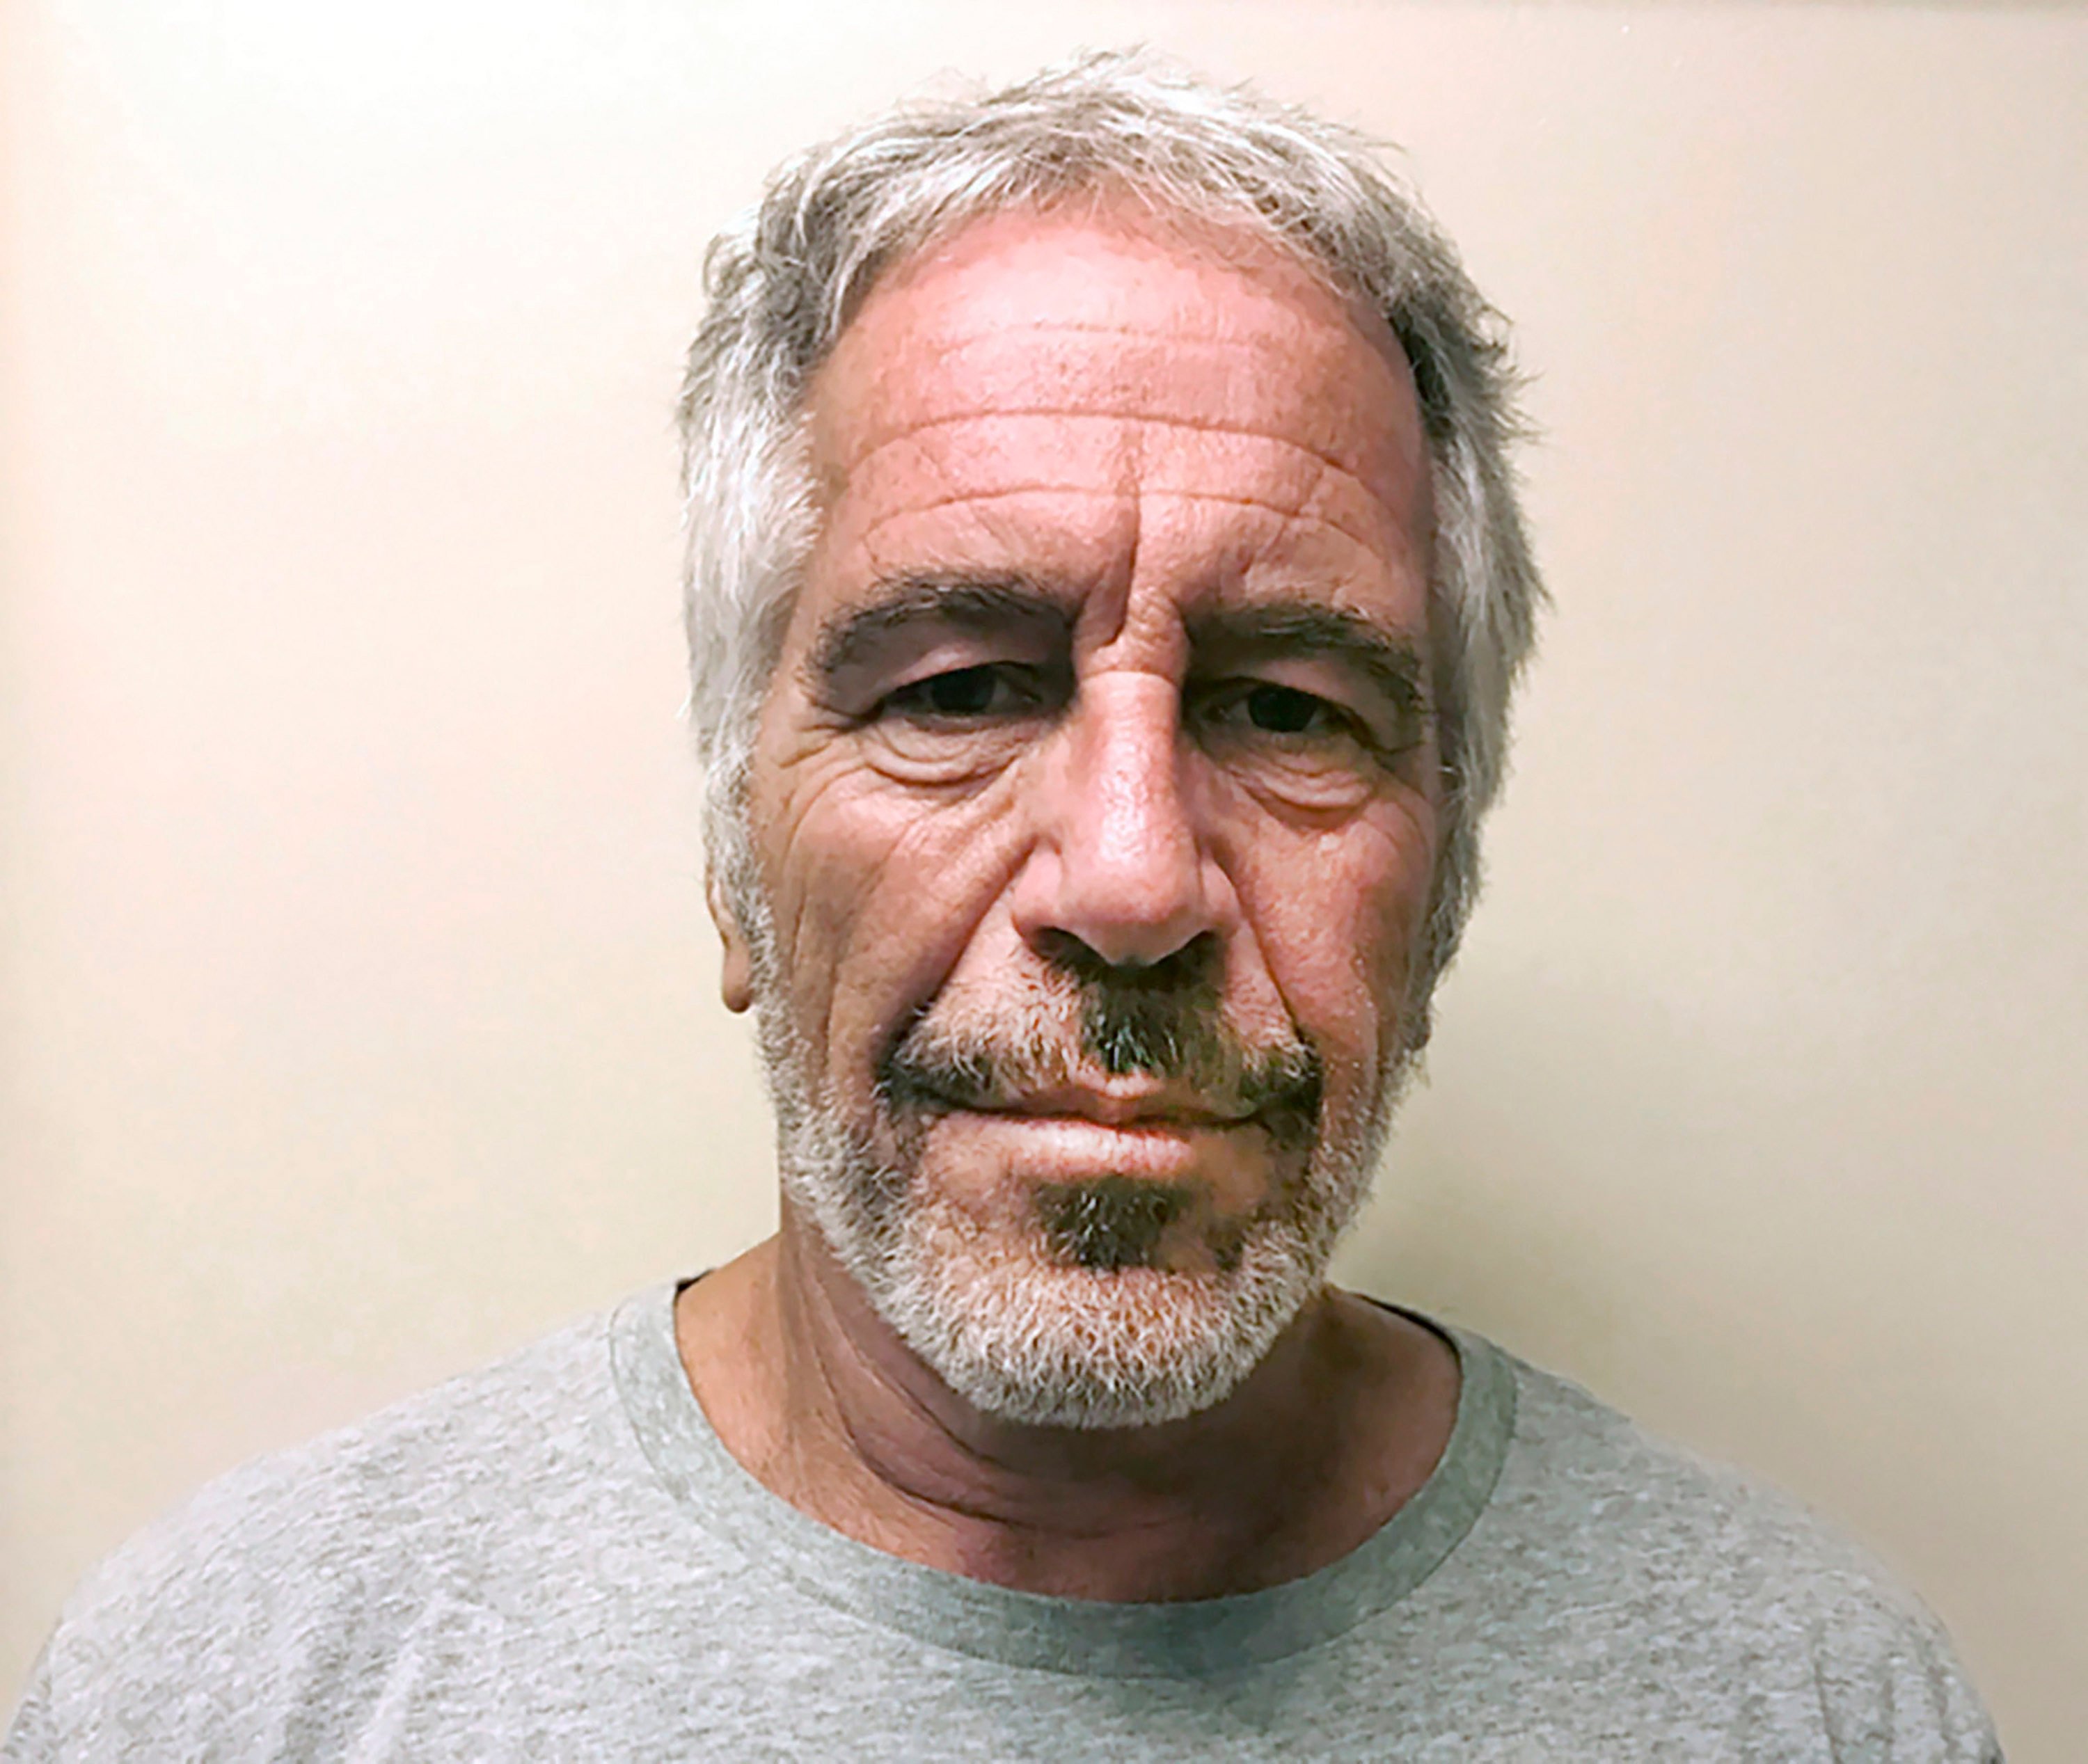 Jeffrey Epstein was arrested in 2019 on federal charges accusing him of paying underage girls for massages and then molesting them at his homes in Florida and New York. Photo: New York State Sex Offender Registry via AP